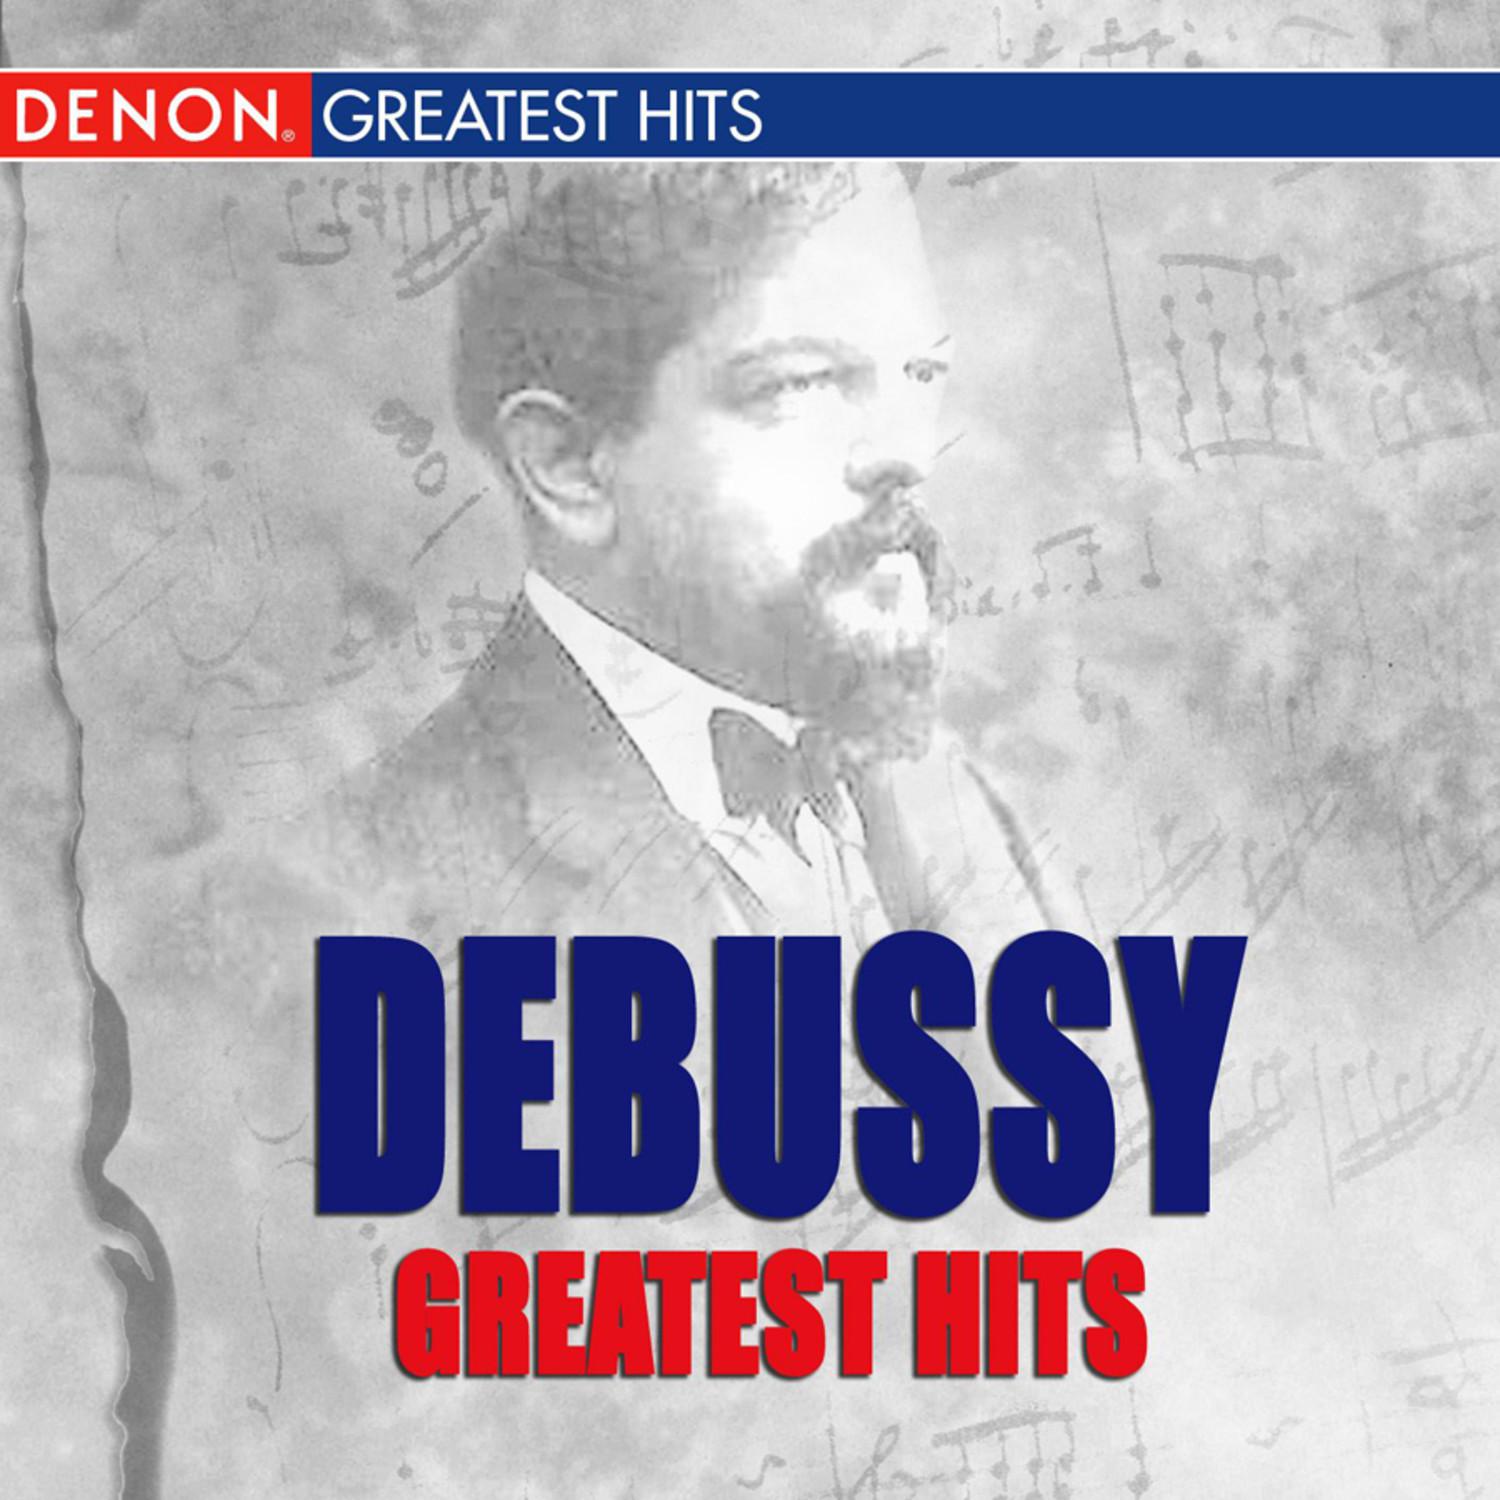 Debussy Greatest Hits